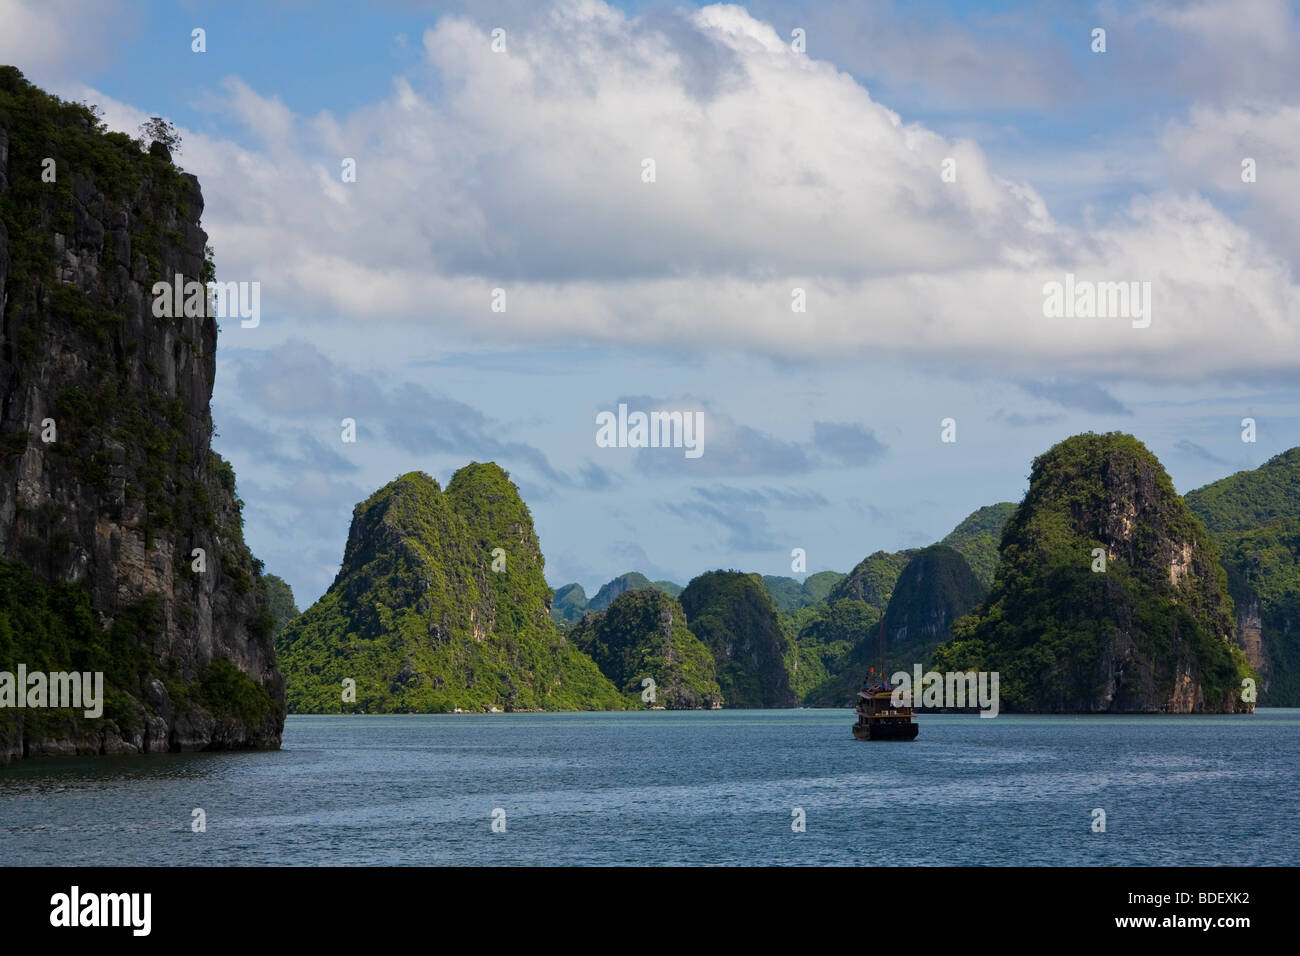 Jungle-covered limestone islands with sheer cliffs in Halong Bay, Vietnam Stock Photo